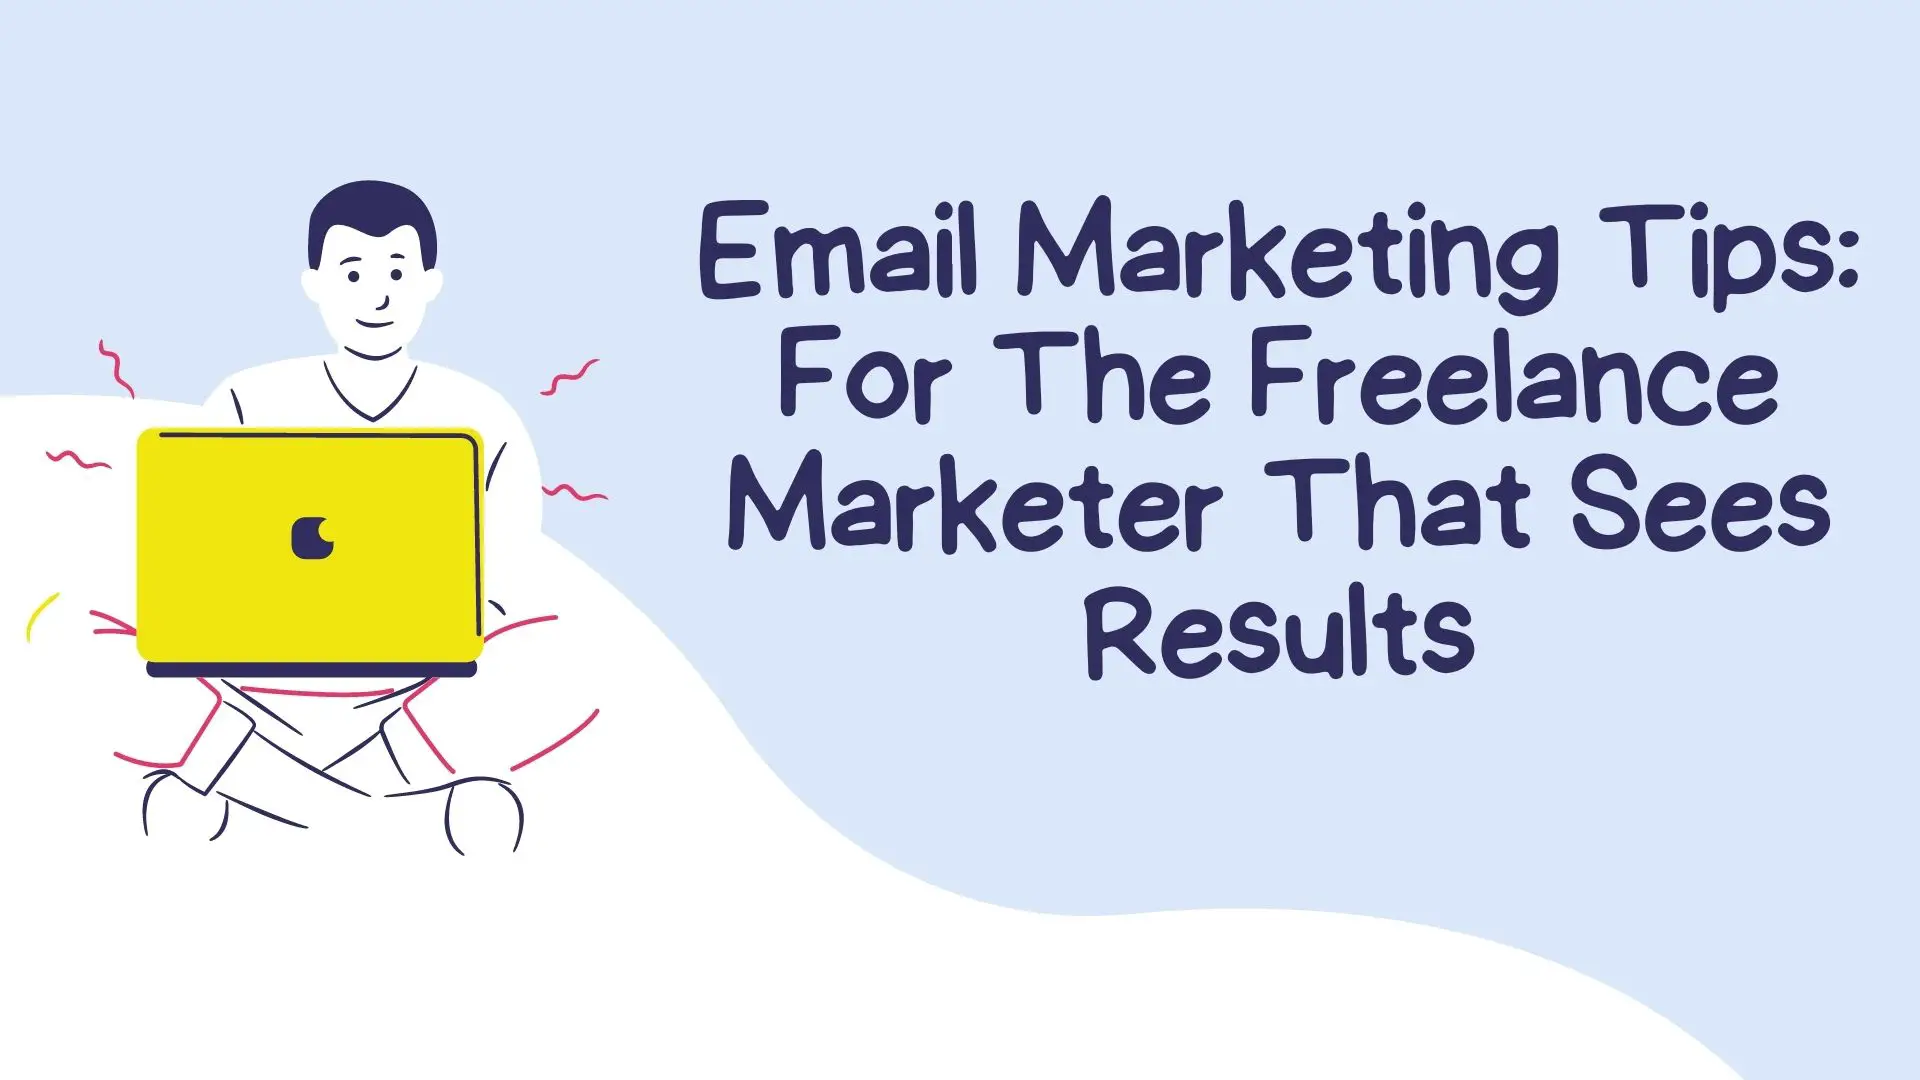 Email Marketing Tips: For The Freelance Marketer That Sees Results